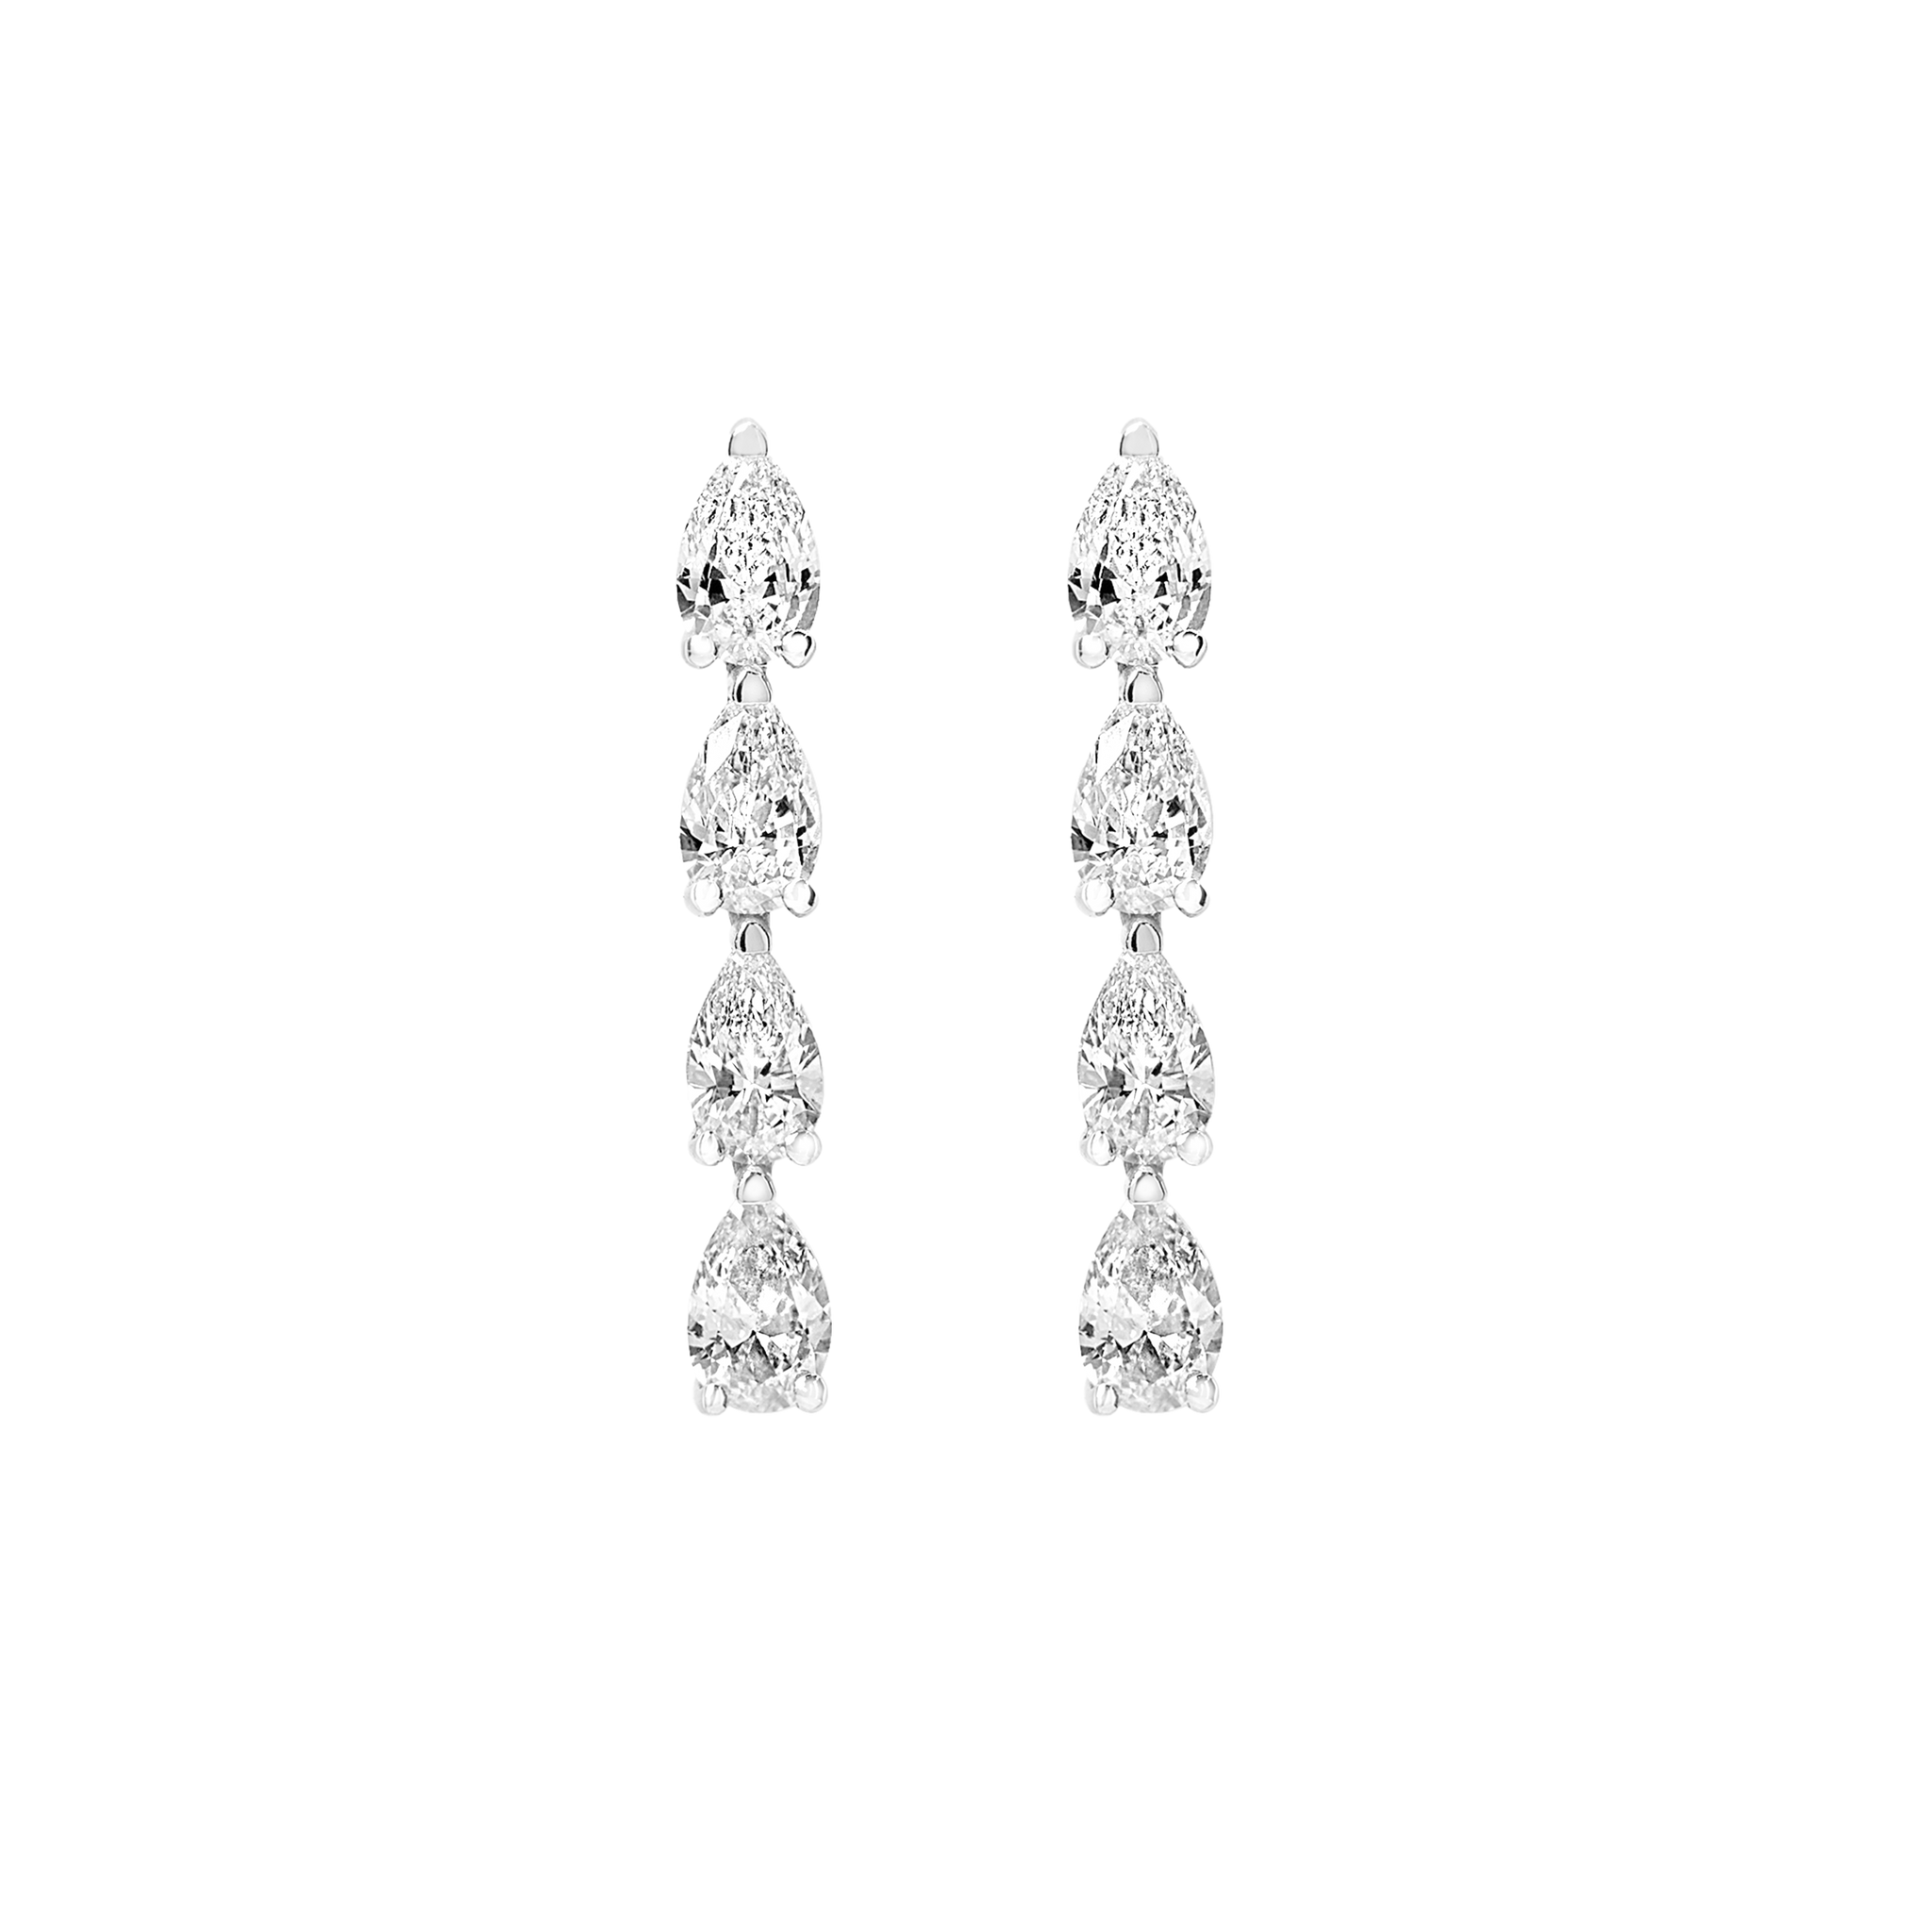 Hand-cast from 2.5 grams of recycled 18k gold, these pear diamond earrings feature four pristine tear drops floating in an architectural column. The pair of earrings is 1.4 total carat weight. The shape and size is fully customizable. Earrings sold as a pair.